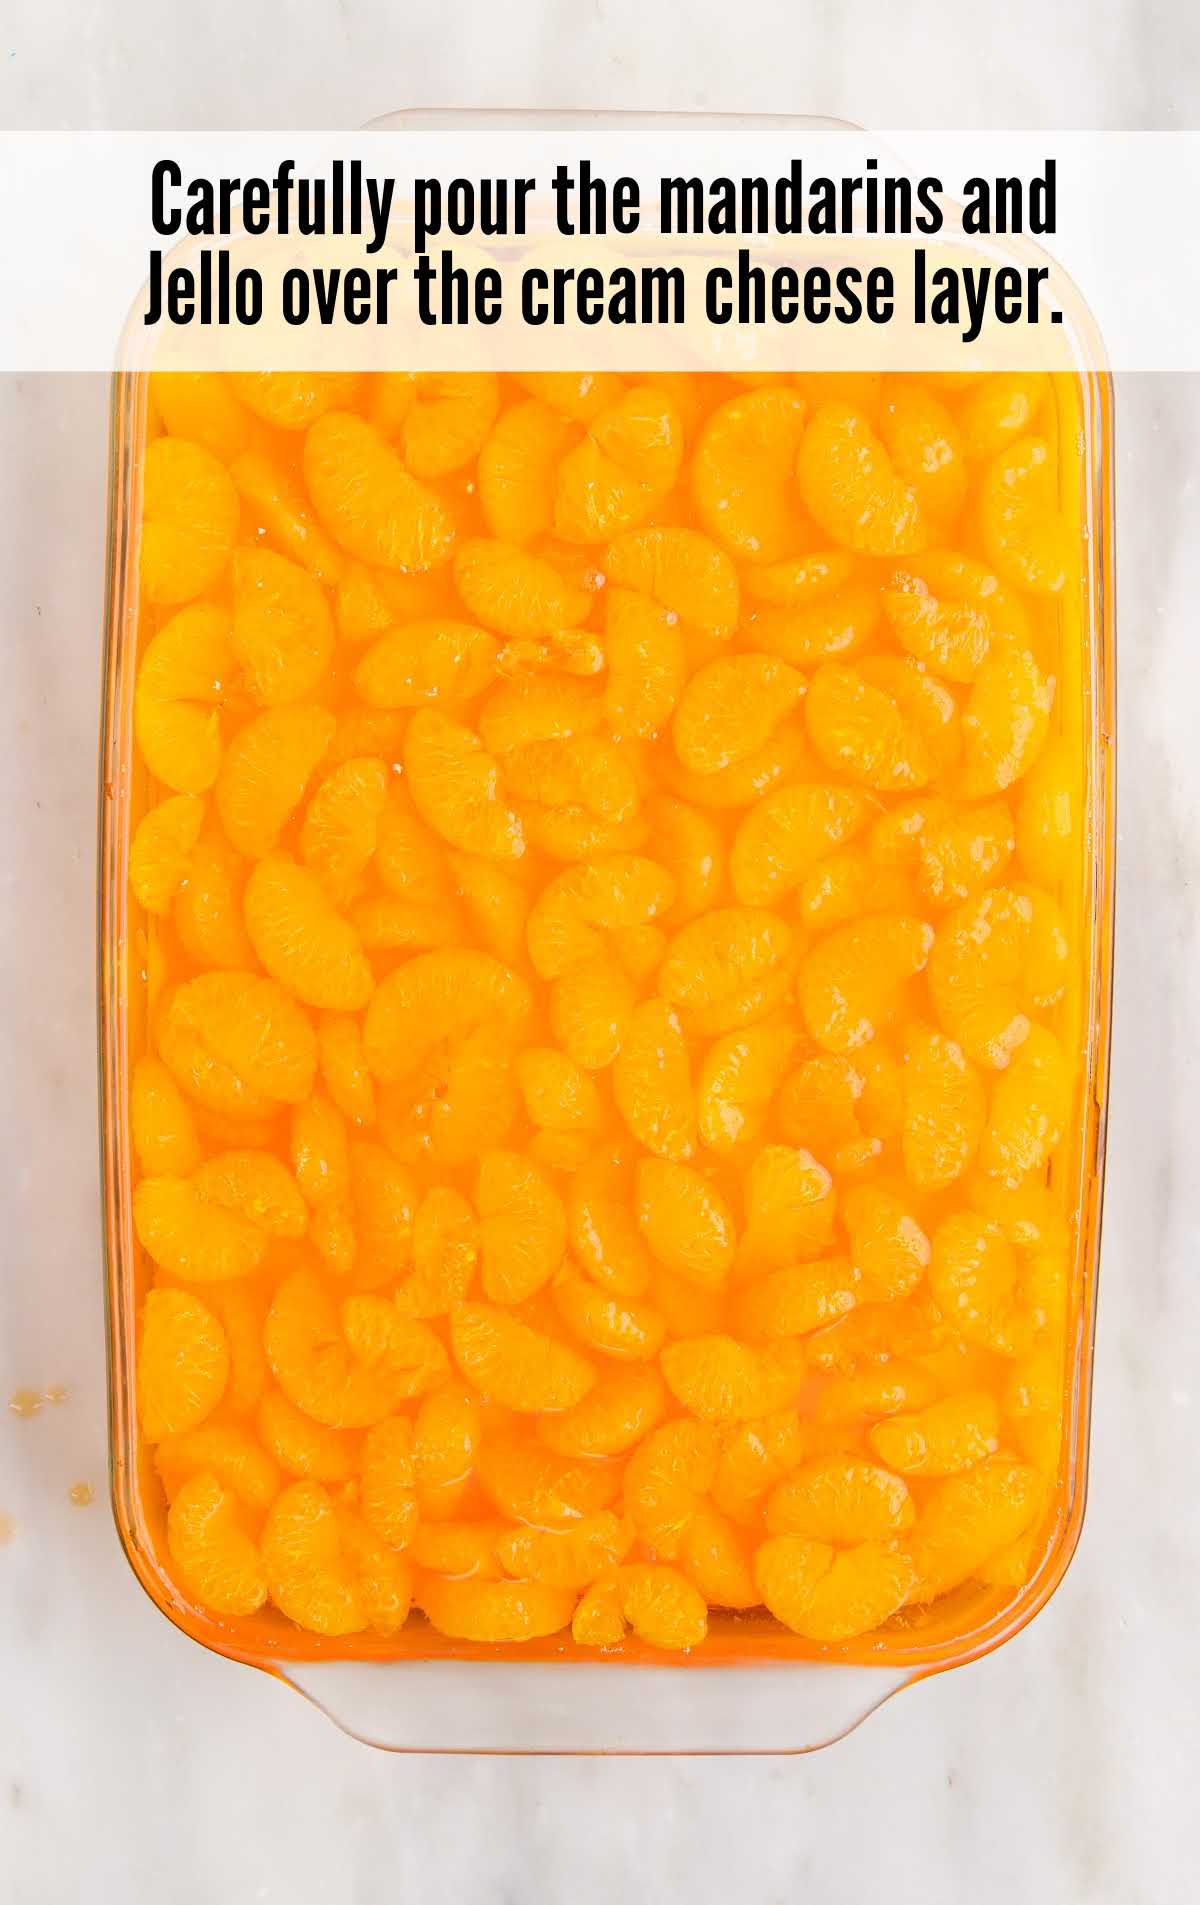 A container with food in it, with Orange and Cream